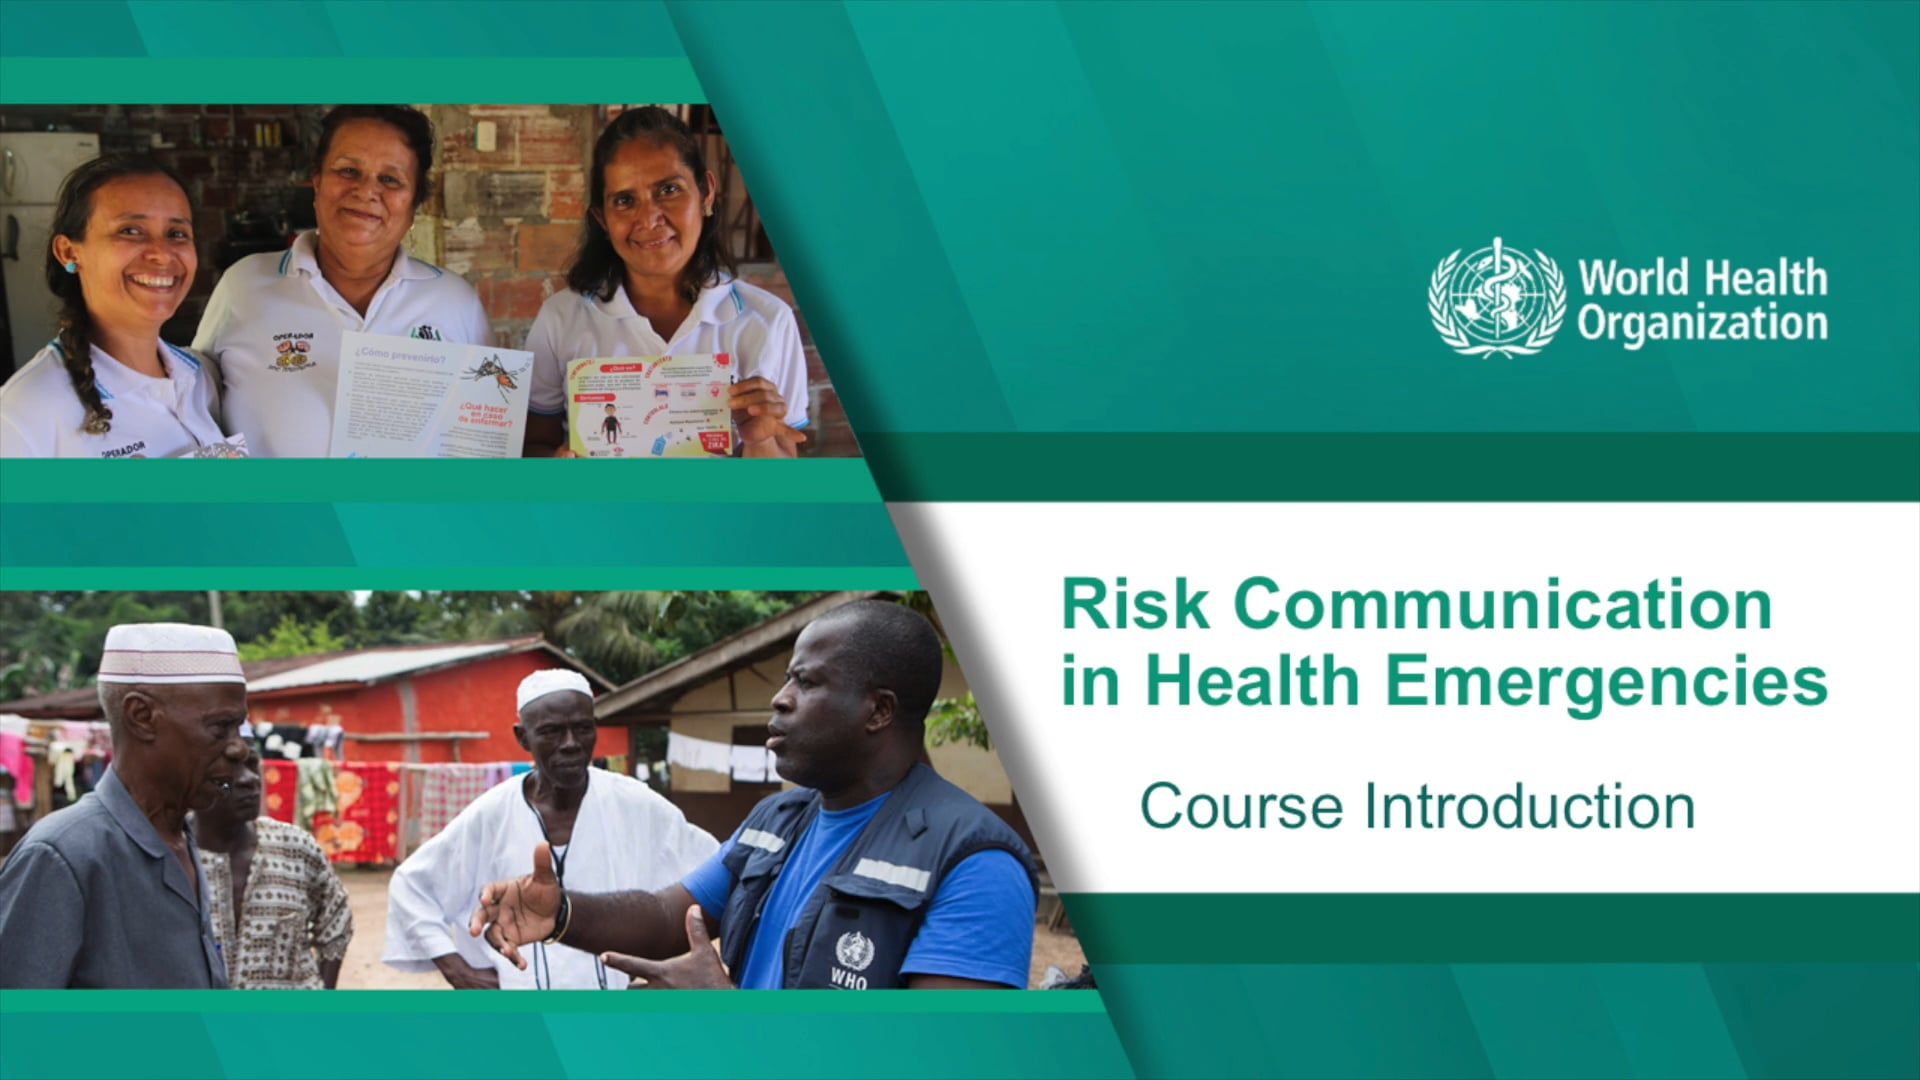 Risk communication in health emergencies: An overview